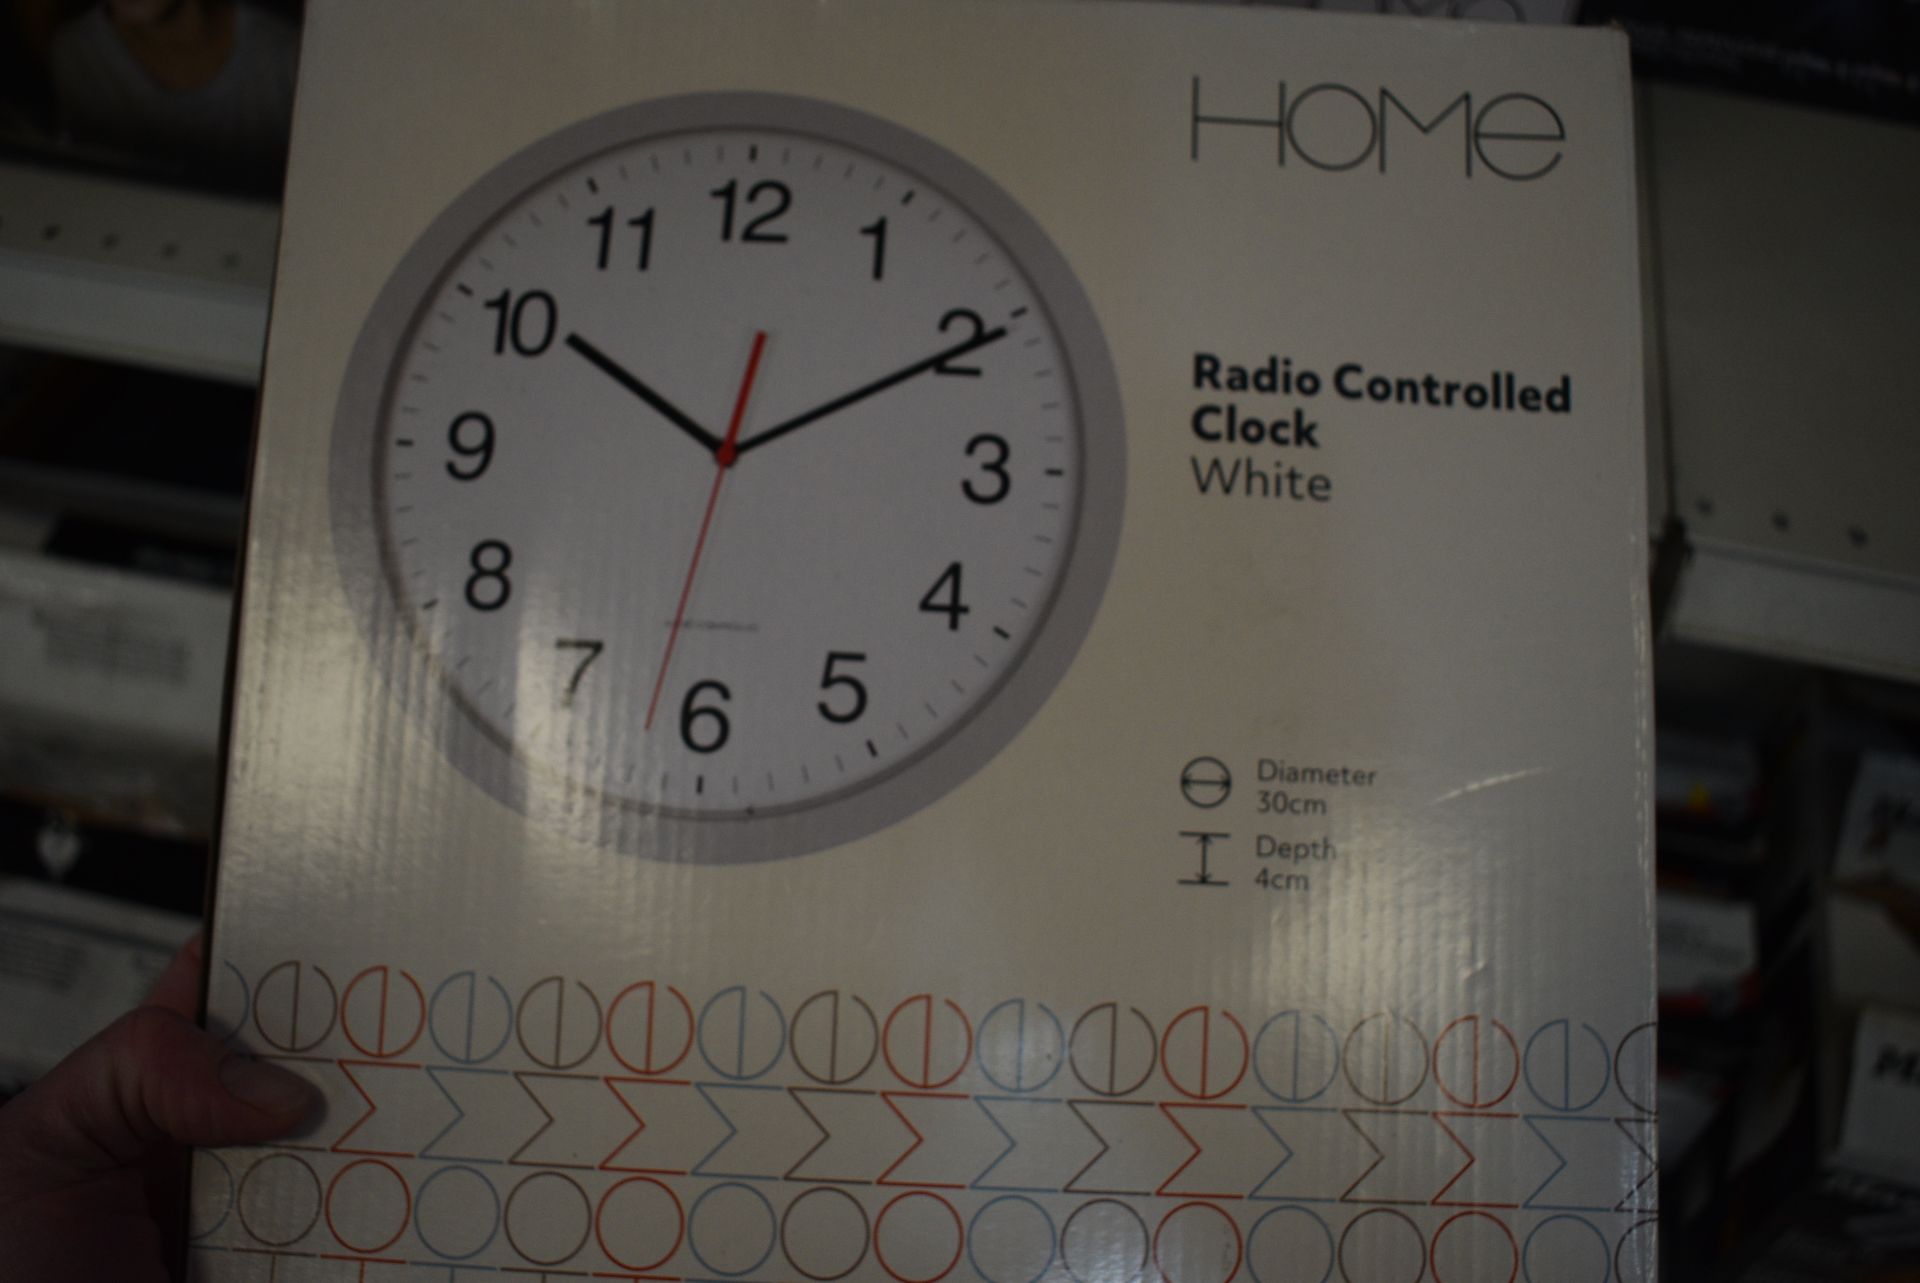 Ten Radio Controlled Clocks and Another Clock